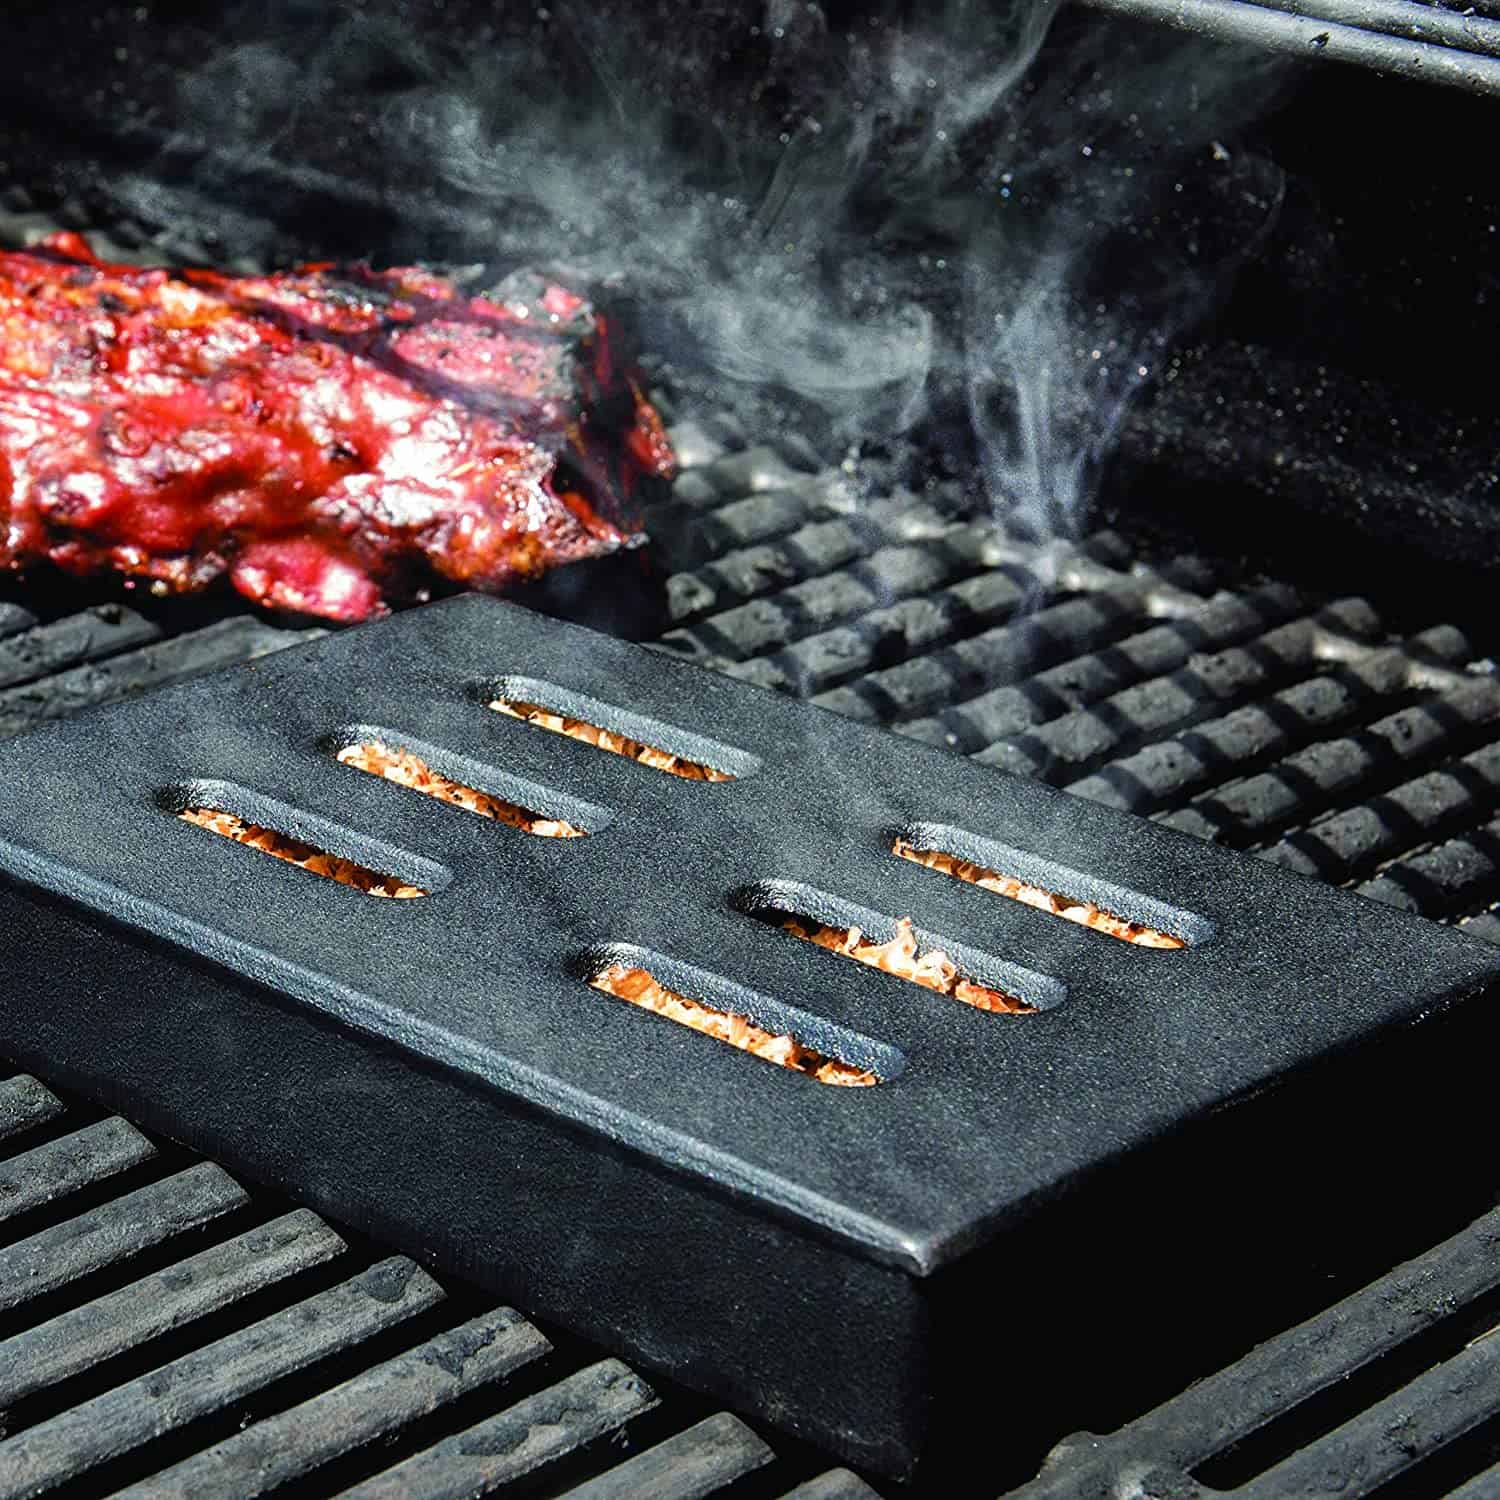 Best overall smoker box for gas grills- Char-Broil Cast Iron Smoker Box on the grill